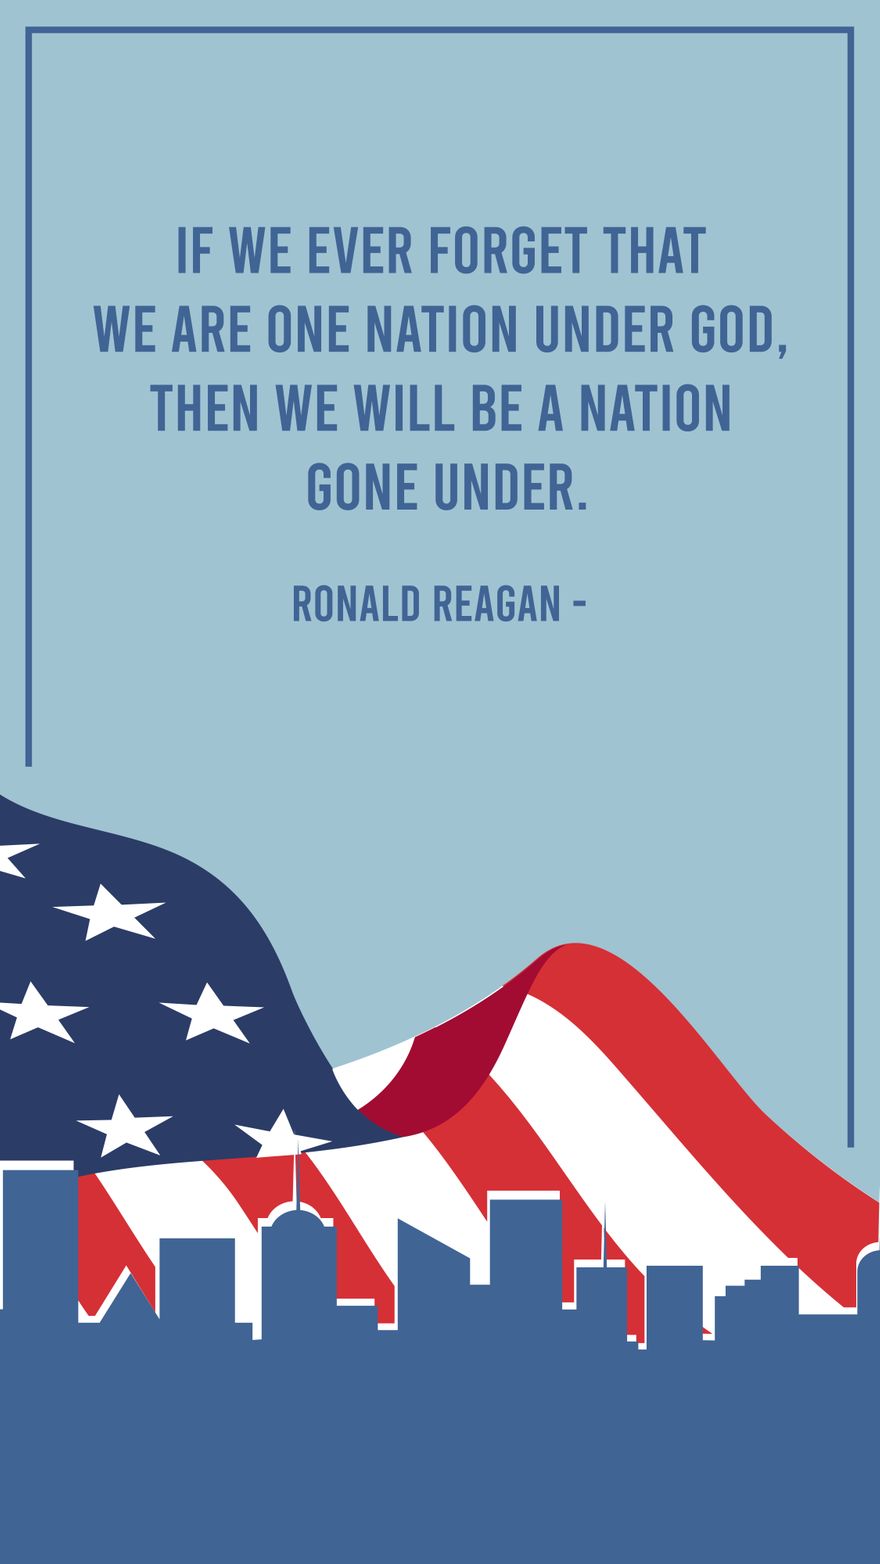 Ronald Reagan - If we ever forget that we are One Nation Under God, then we will be a nation gone under.